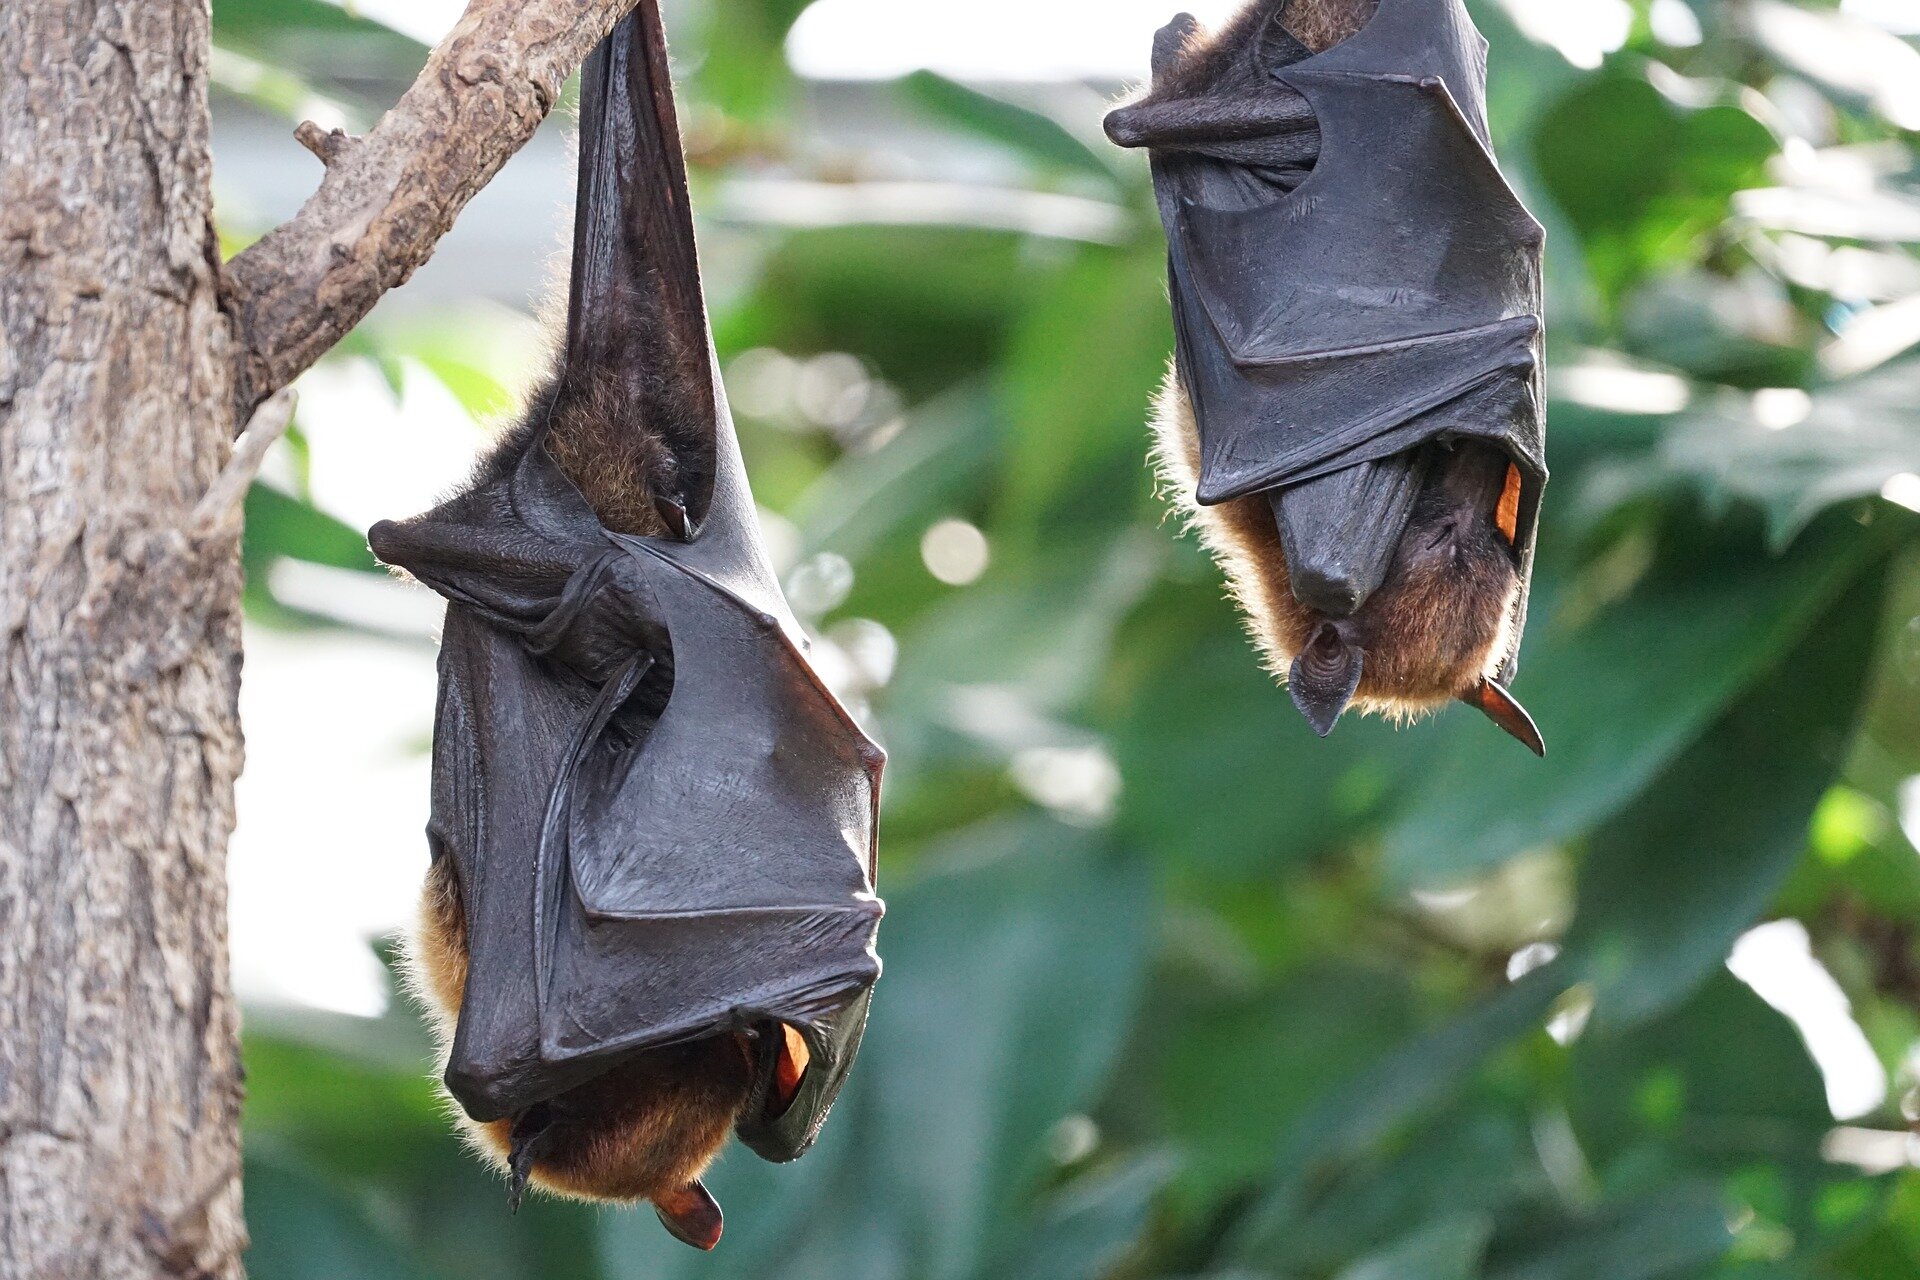 Bats live mostly out of sight and out of mind. But their falling numbers are  a reason to look up and worry